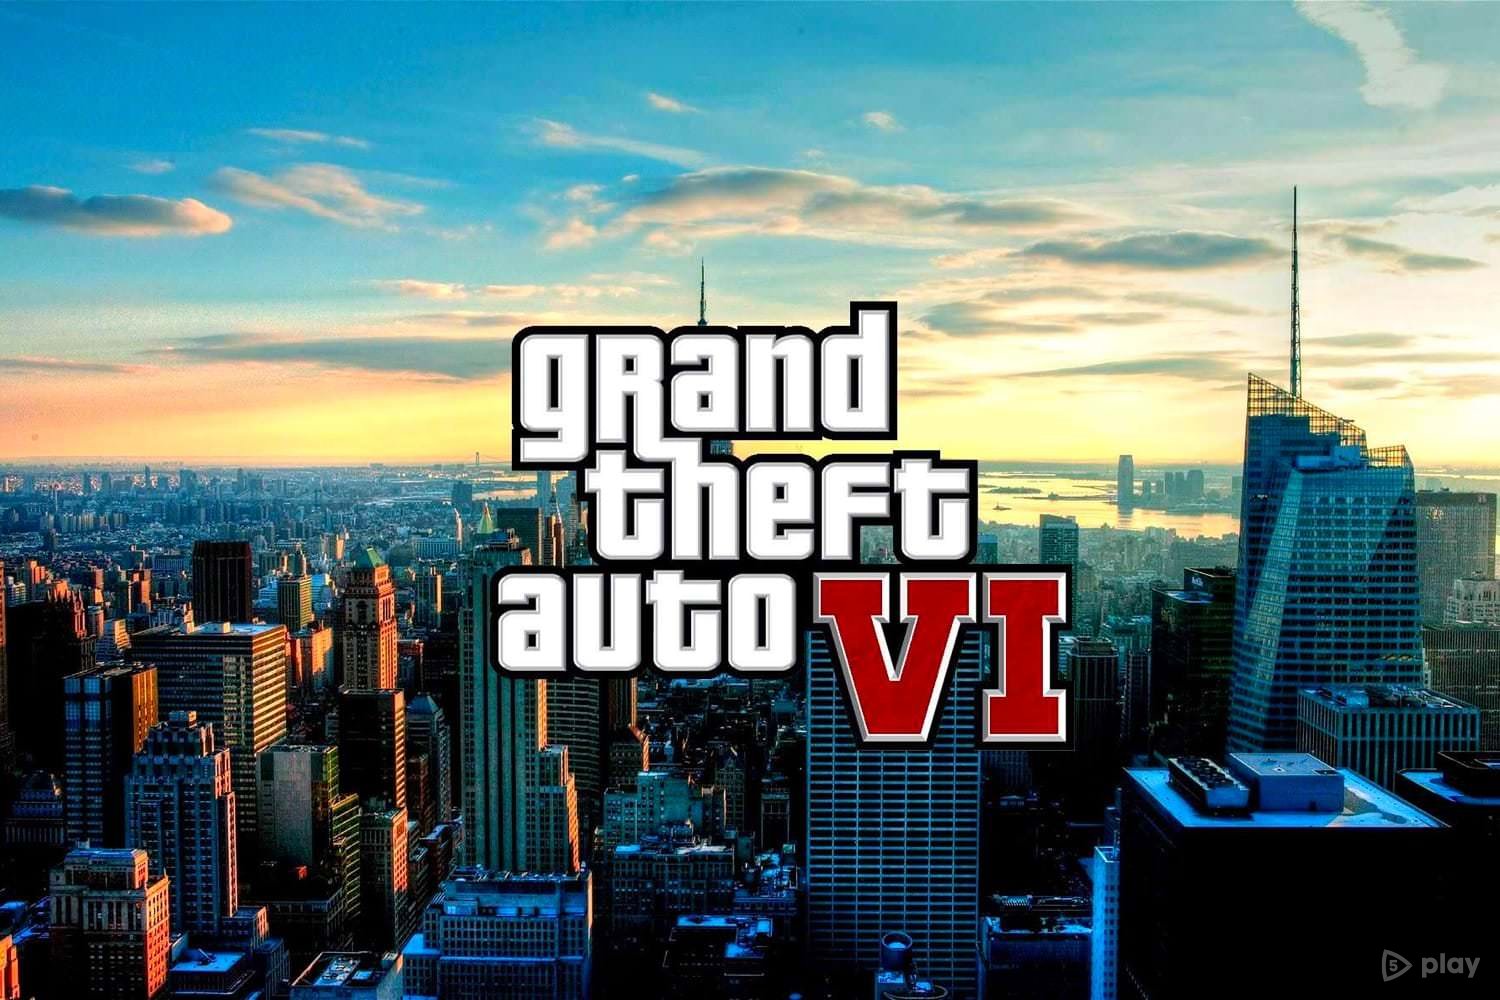 The announcement of GTA VI should take place this year